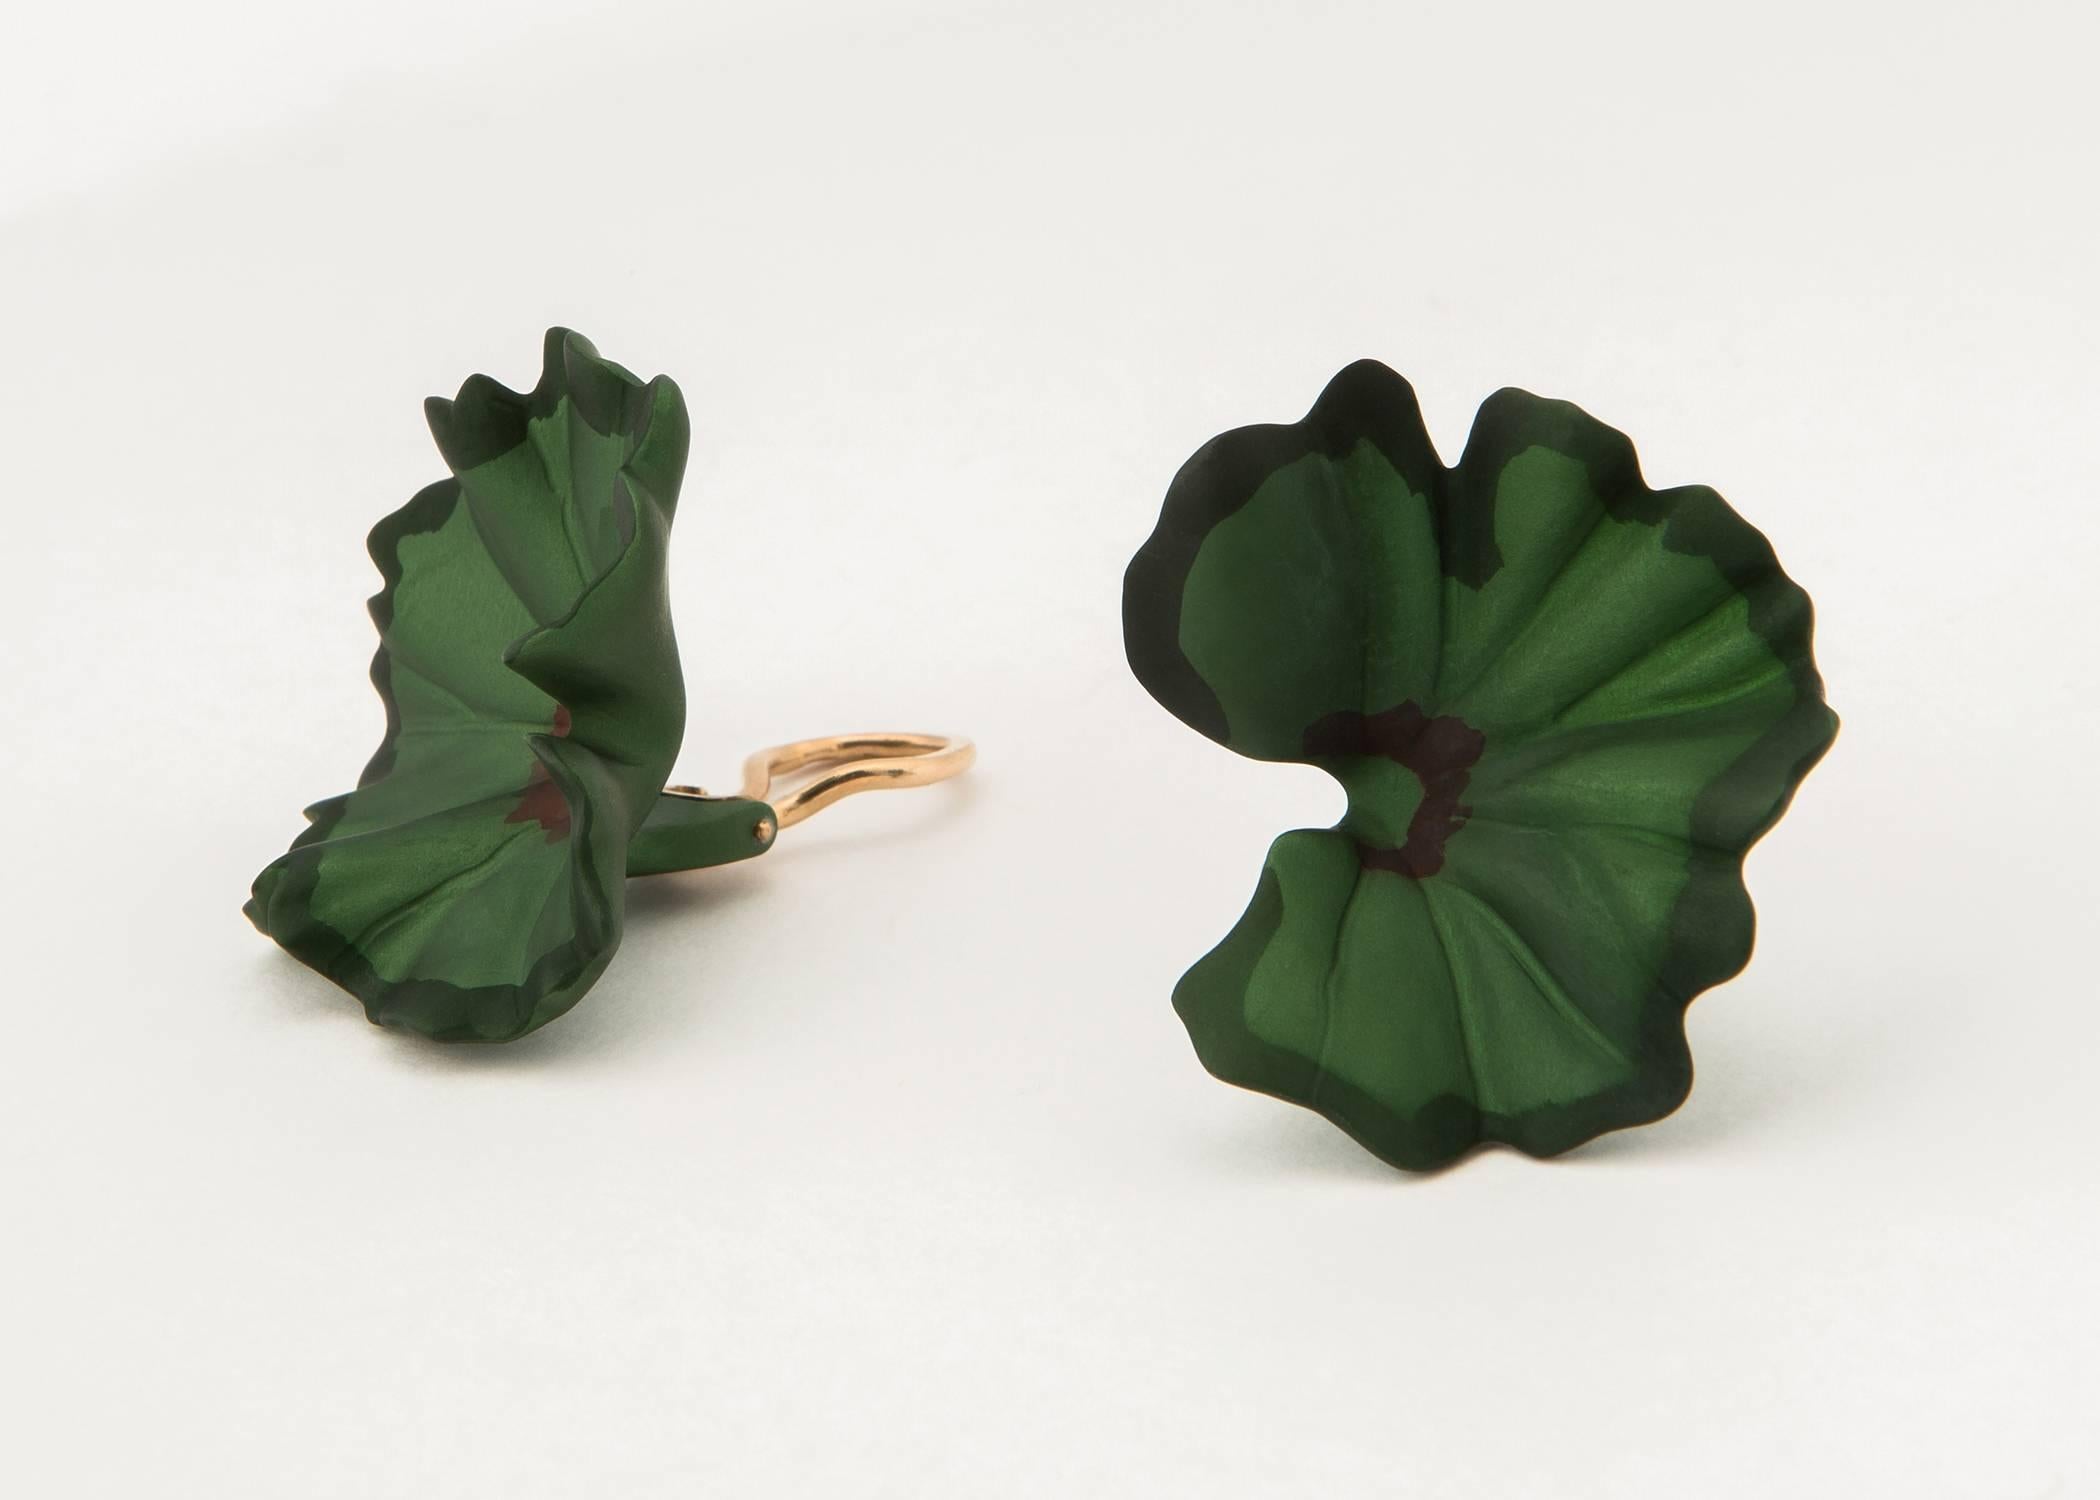 The only living jewelry designer to be honored at The Metropolitan Museum of Art. JAR ( Joel Arthur Rosenthal ) creates wearable sculpture using the simple shape of a geranium leaf. Rare and collectable. Never worn mint condition with original suede